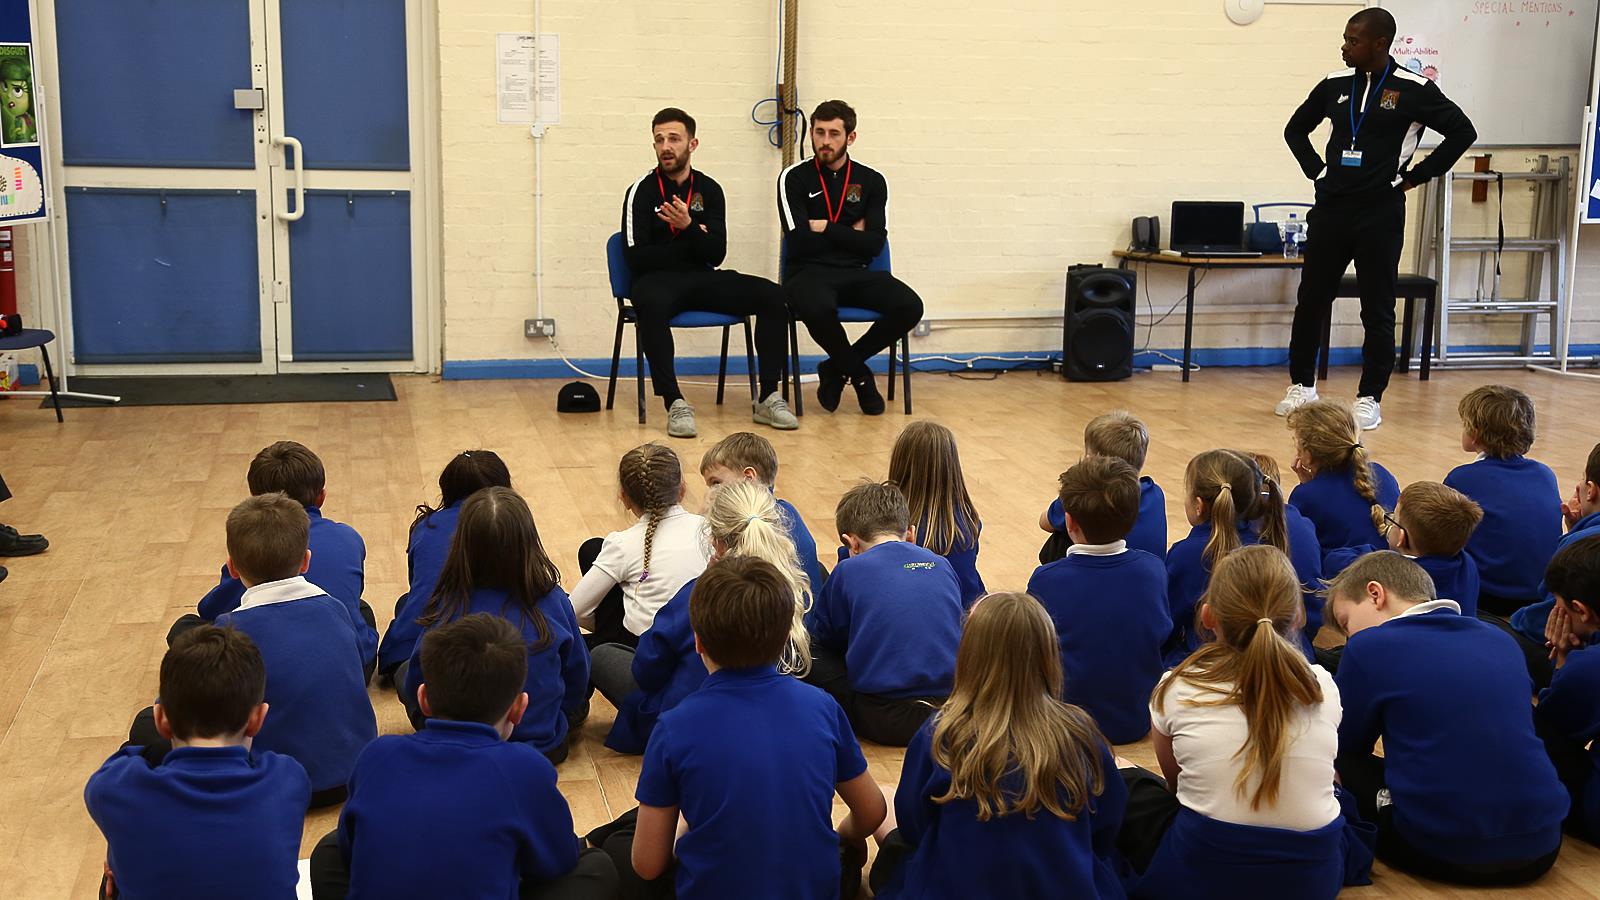 HELMDON PRIMARY SCHOOL HOSTS COBBLERS TAKEOVER DAY - News - Northampton Town 